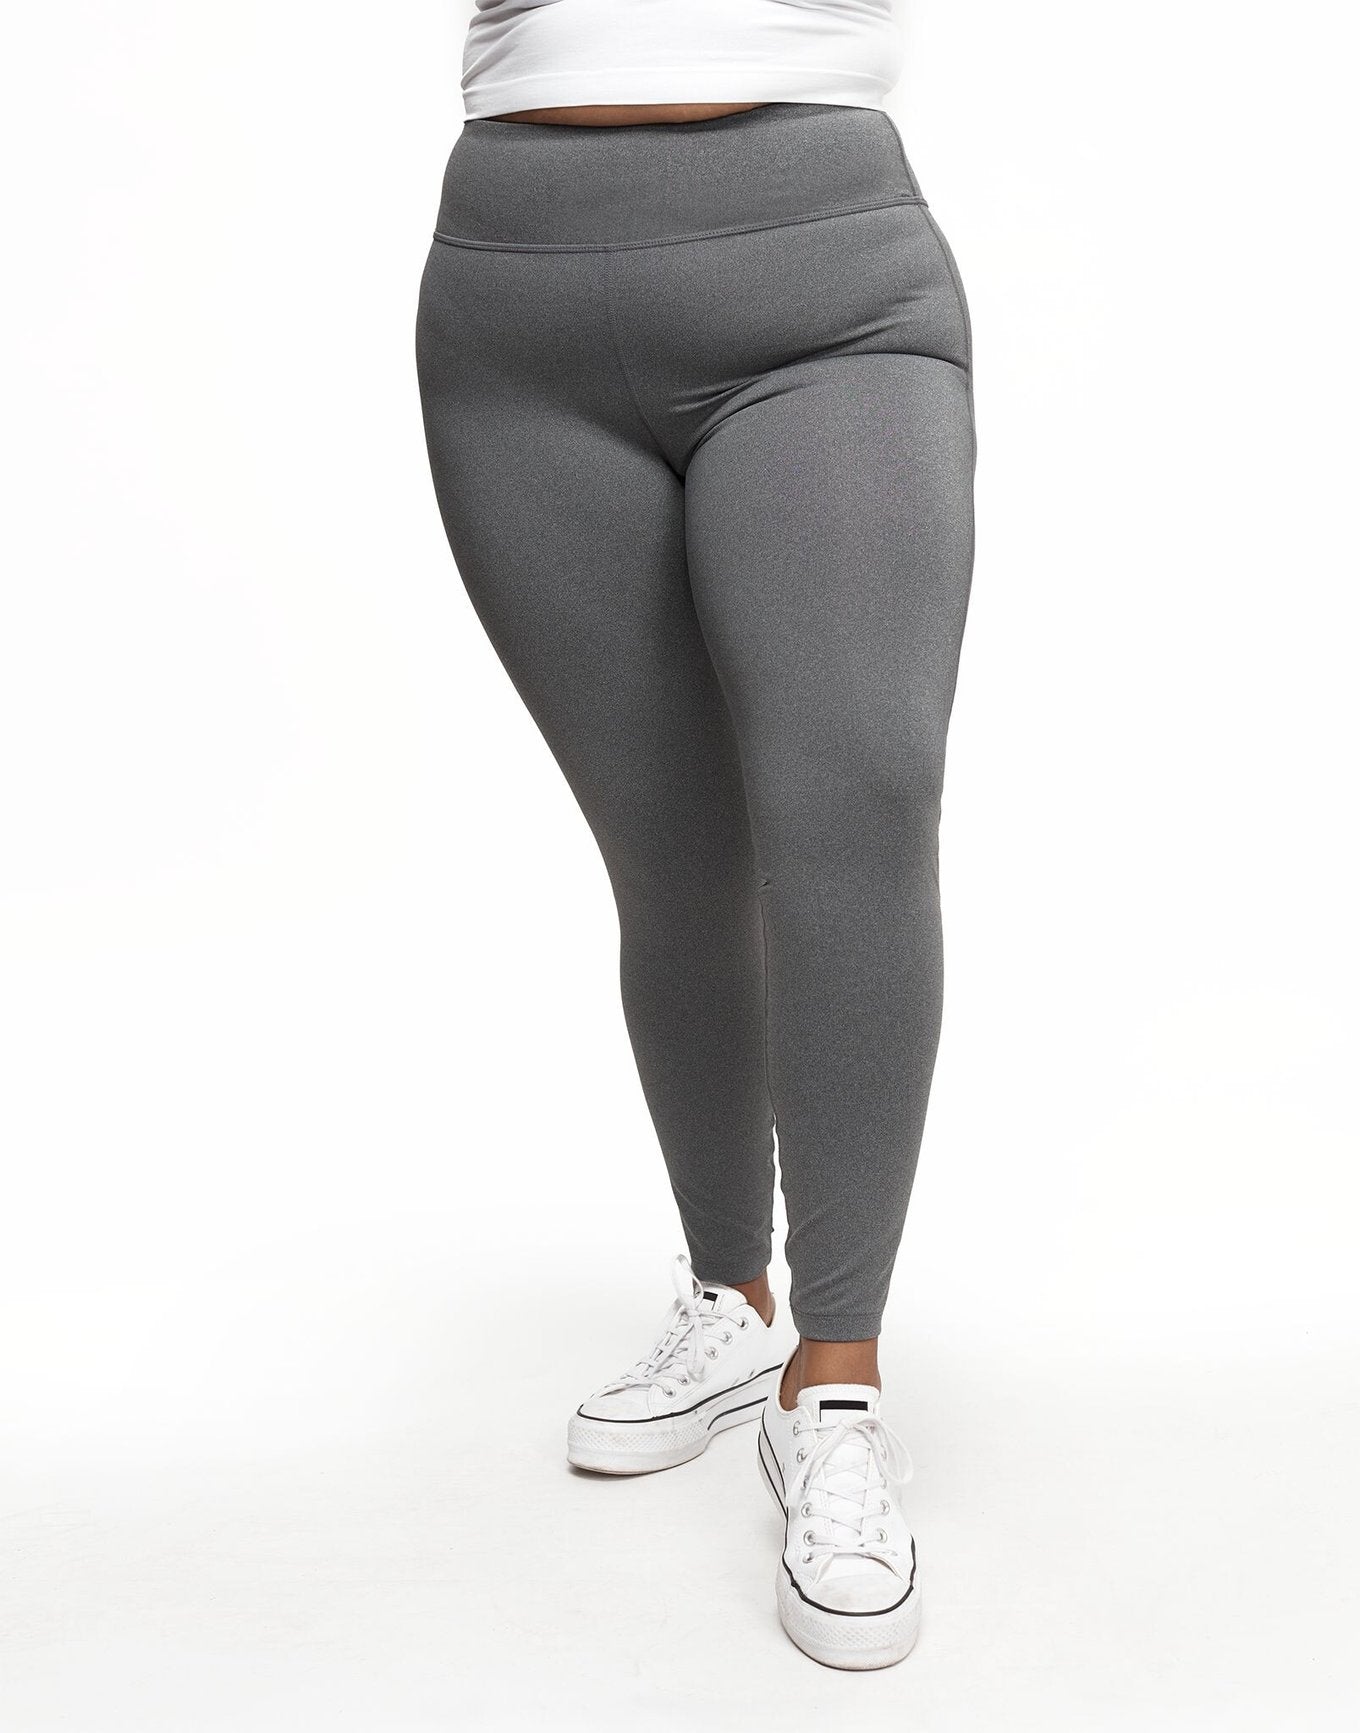 Adore Me Haley Heathered Legging Heather Compression Activewear Legging in color Meteorite Light Heather and shape legging